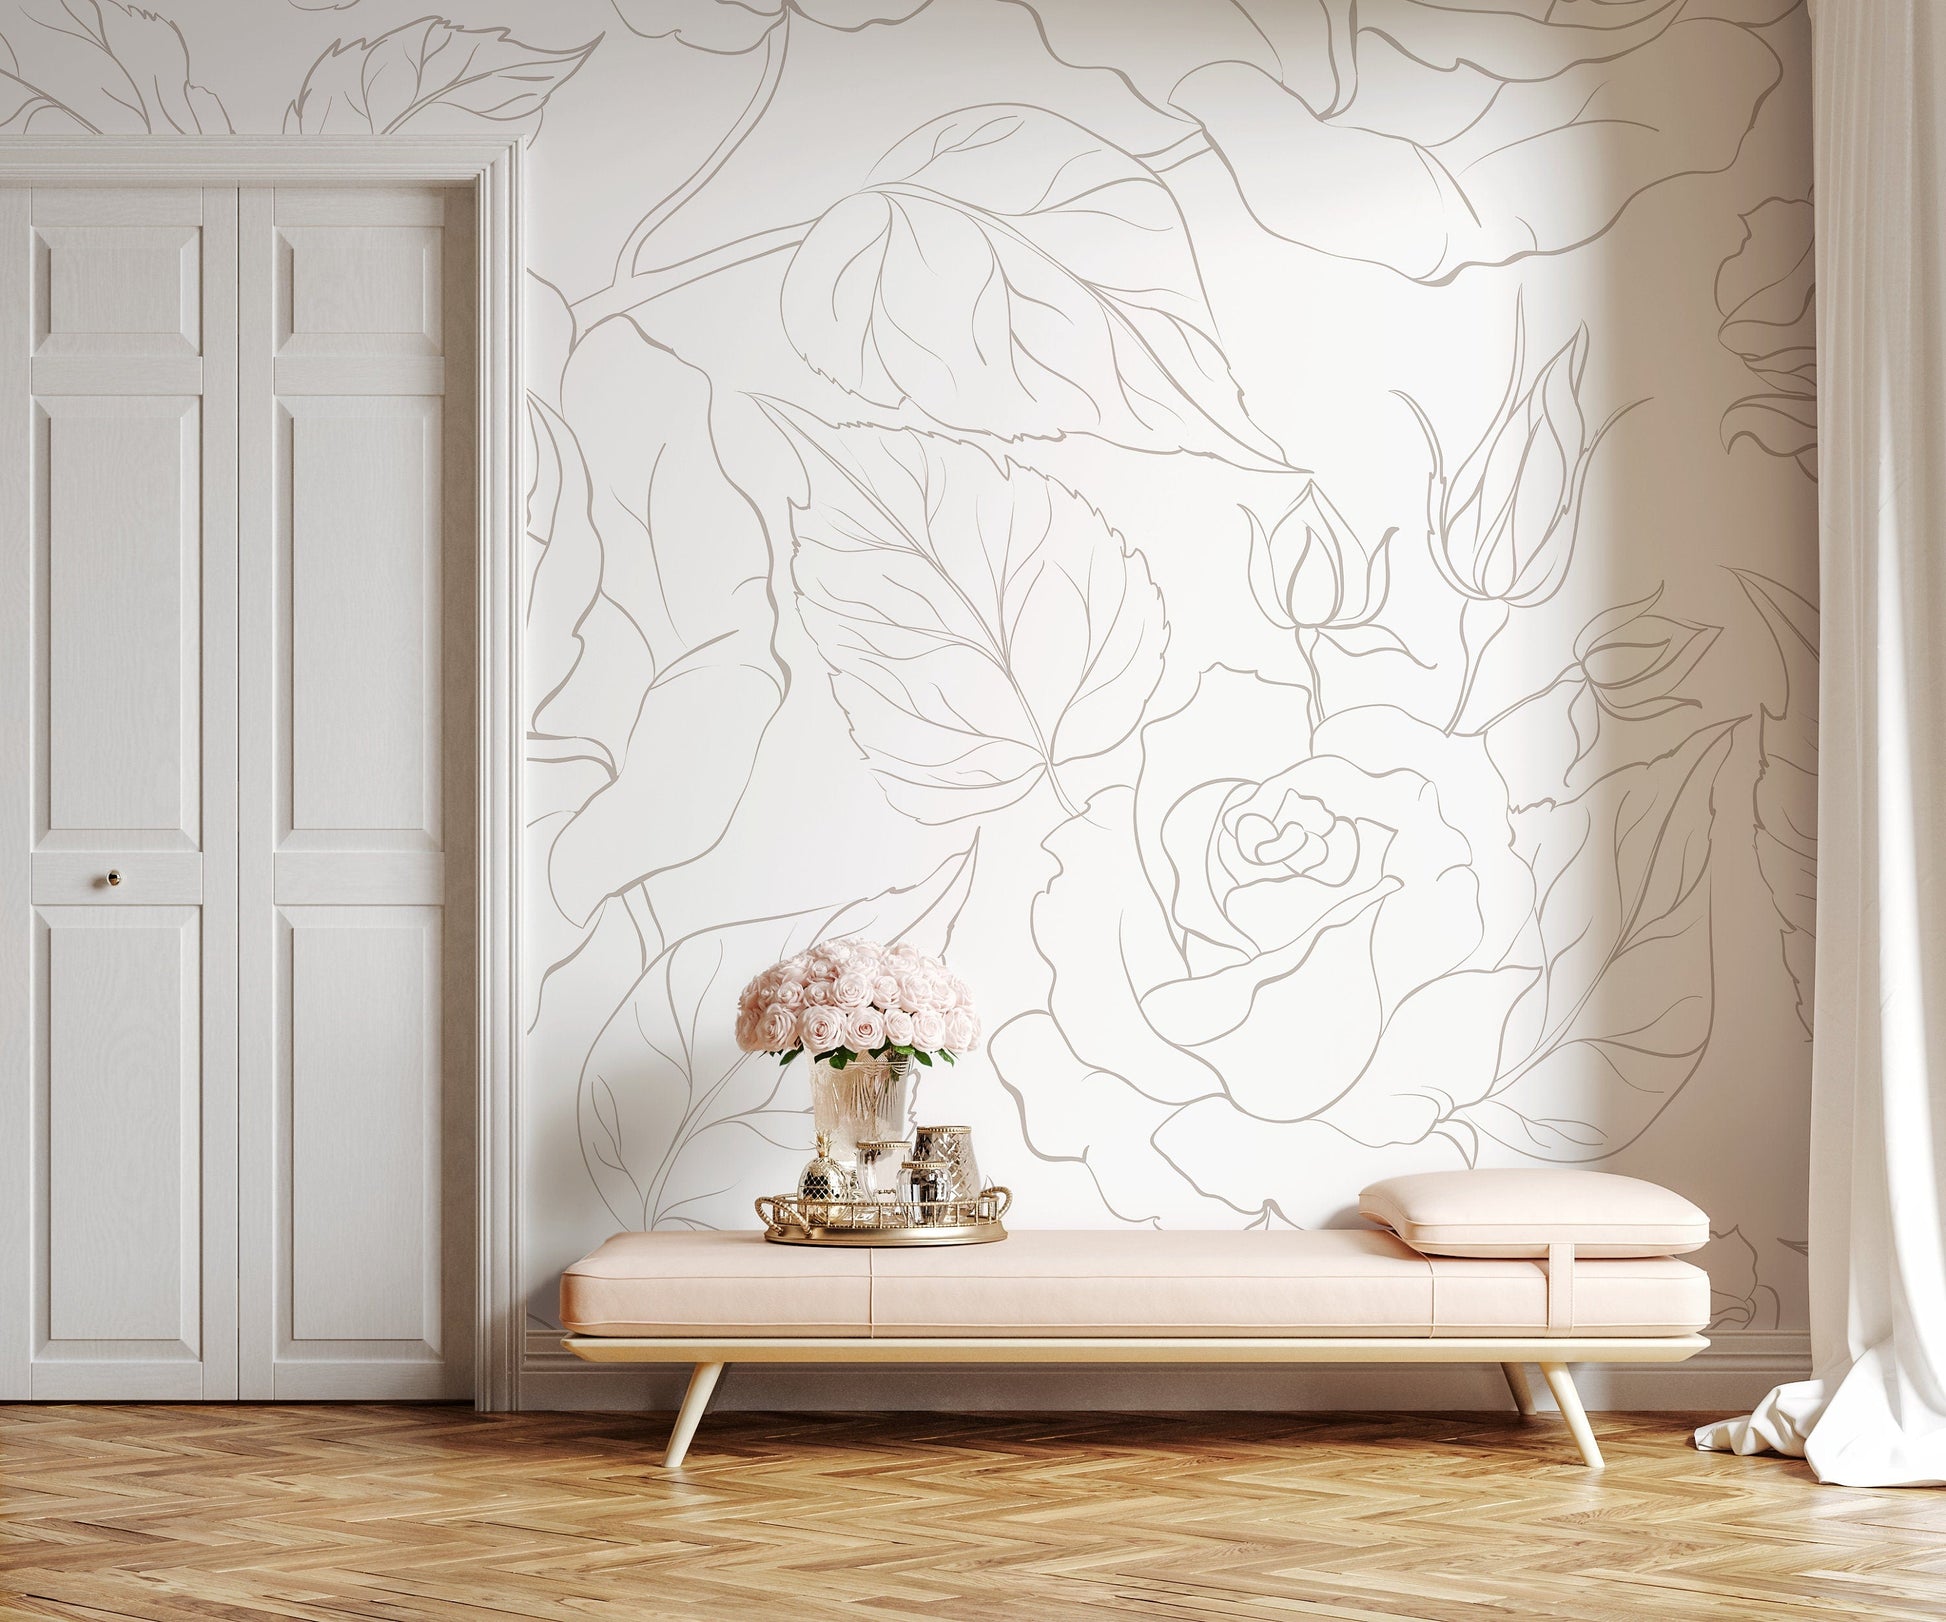 The Neutral Minimalist Peony Mural Mural Self Adhesive Large Scale Wallpaper Peony Floral Traditional Pre-pasted or Peel and Stick - ZADP